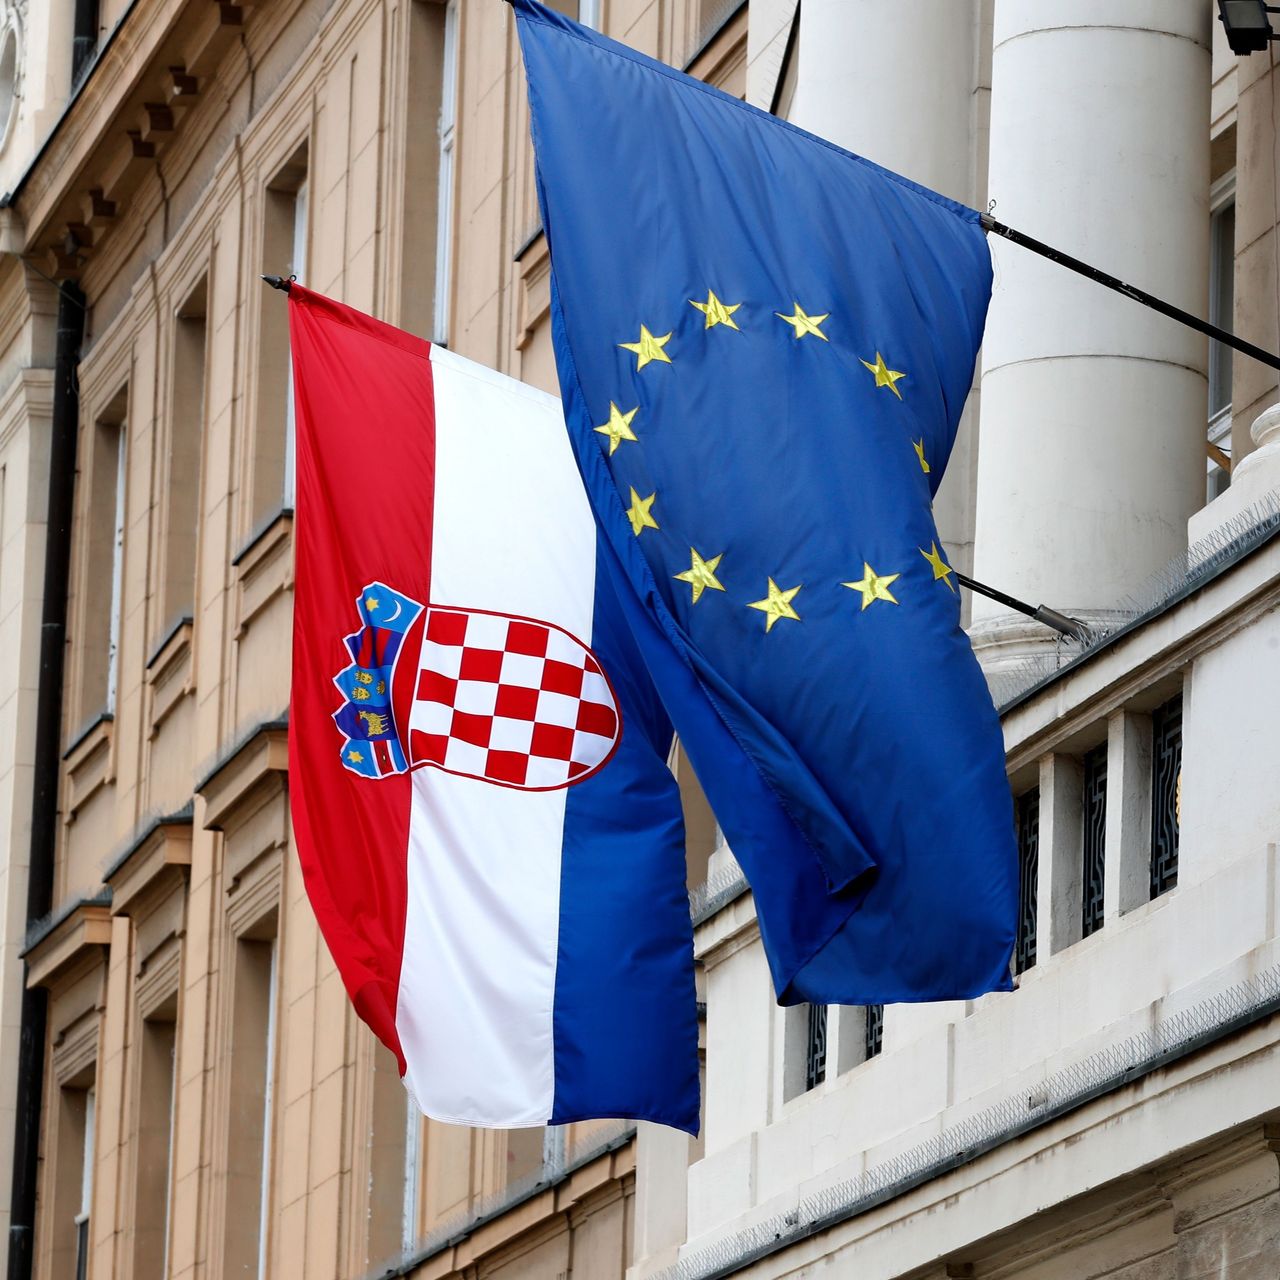 Eurozone finance ministers will discuss the addition of Croatia to the trade bloc.